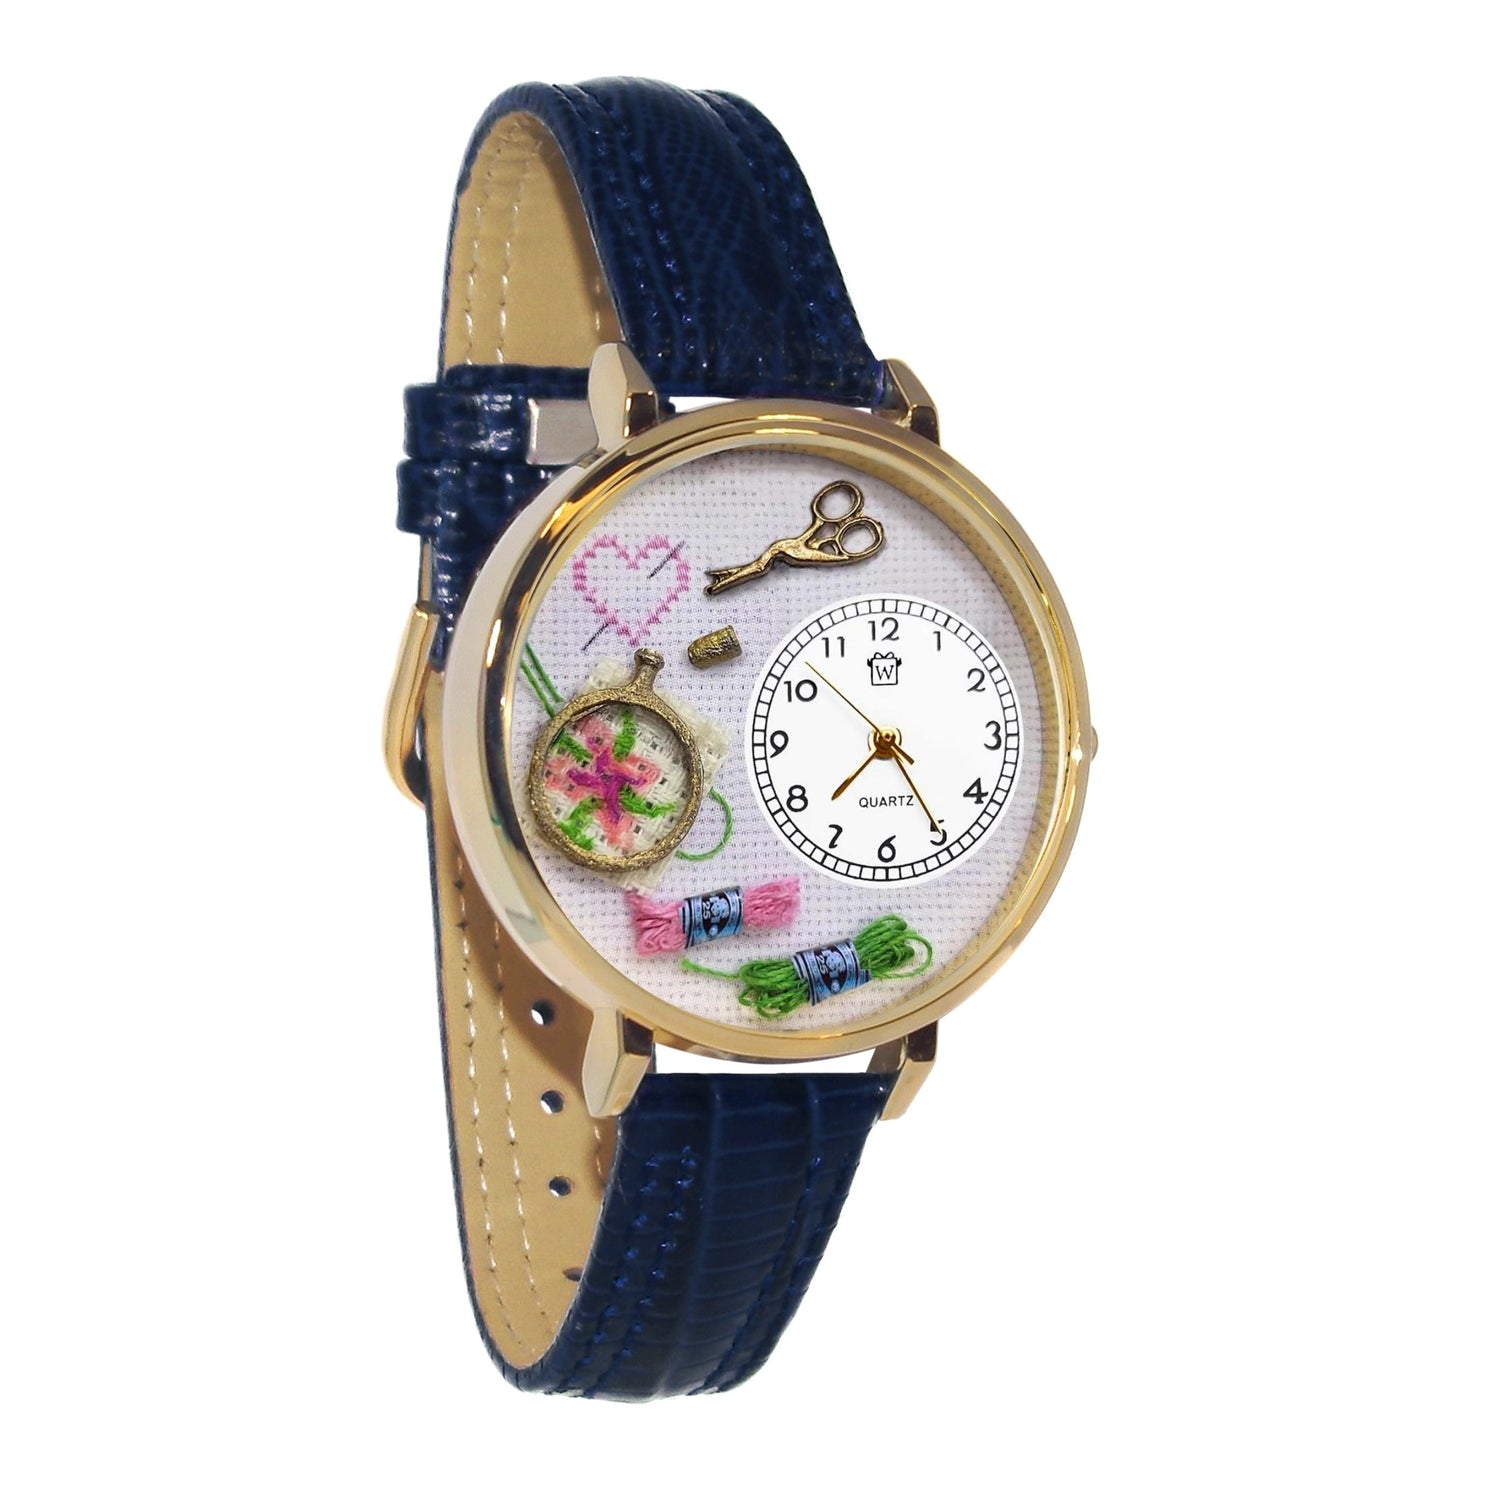 Whimsical Gifts | Cross Stitch 3D Watch Large Style | Handmade in USA | Hobbies & Special Interests | Sewing & Crafting | Novelty Unique Fun Miniatures Gift | Gold Finish Navy Blue Leather Watch Band